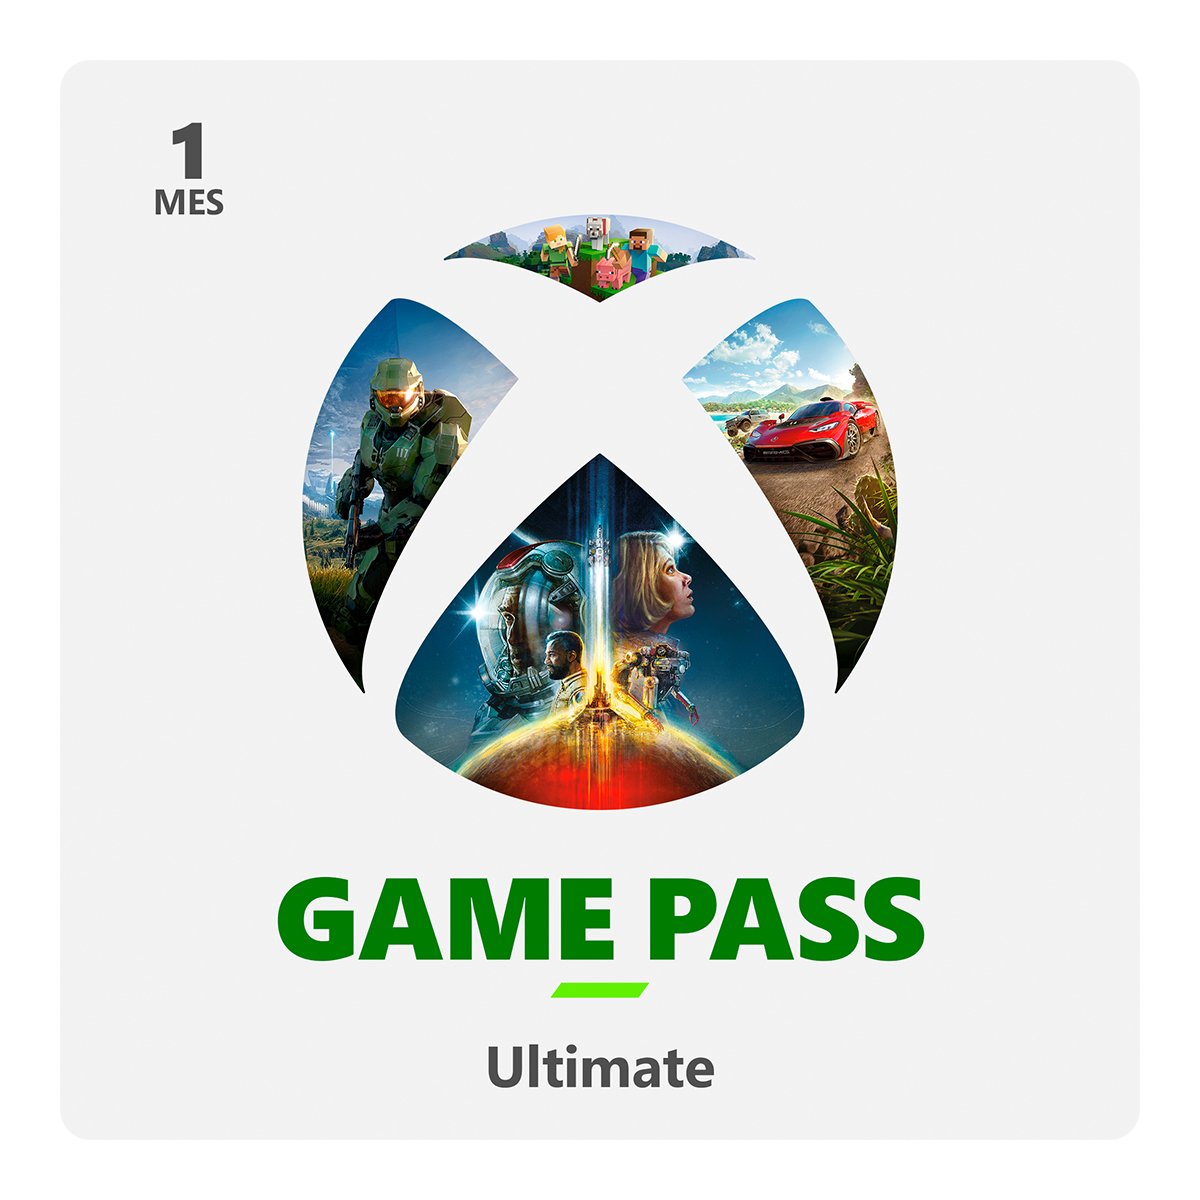 XBOX Game Pass Ultimate- 1 mes